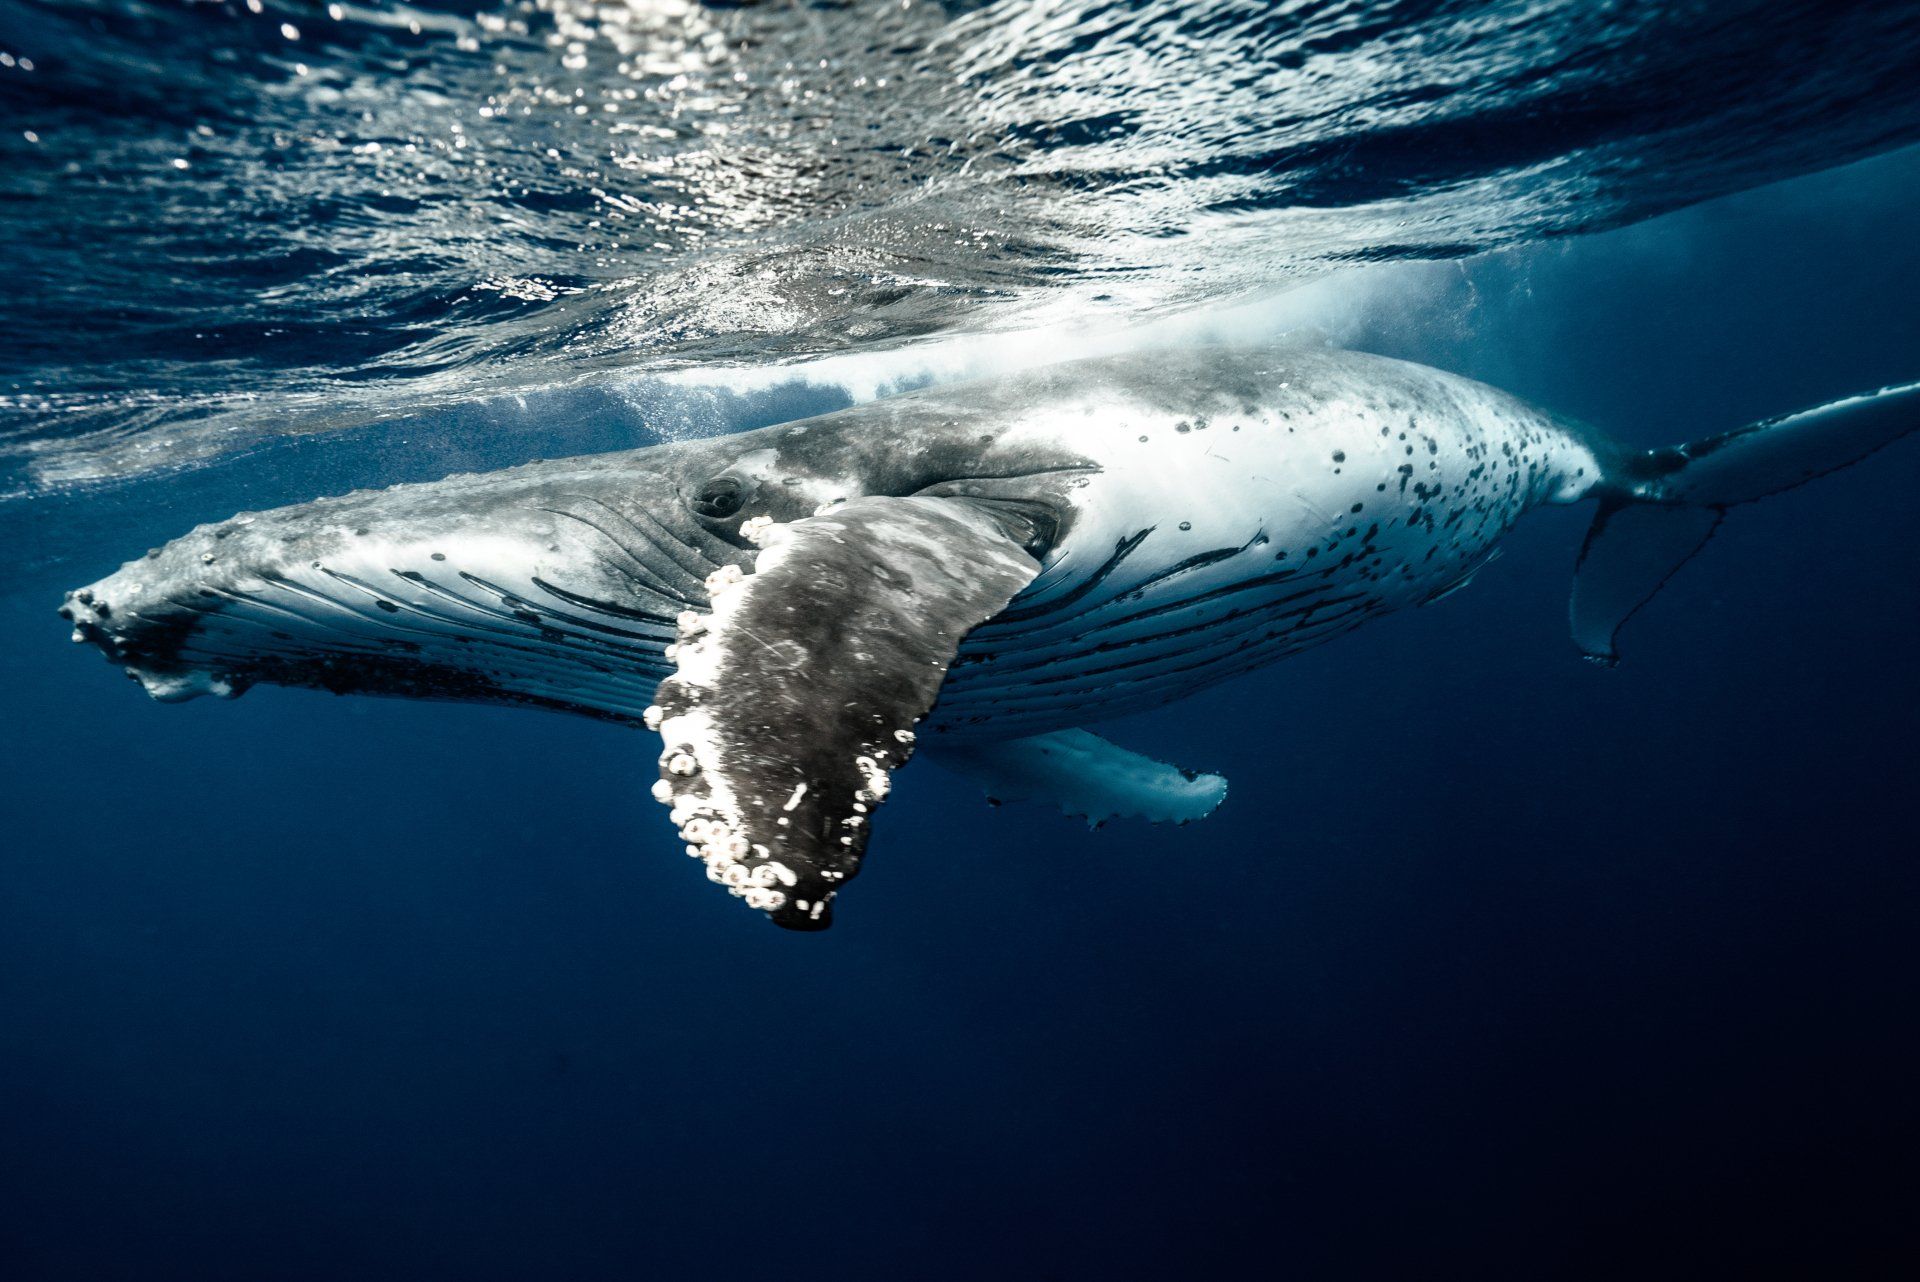 Humpback whales are majestic visitors to the Great Astrolabe reef in Kadavu between May to November